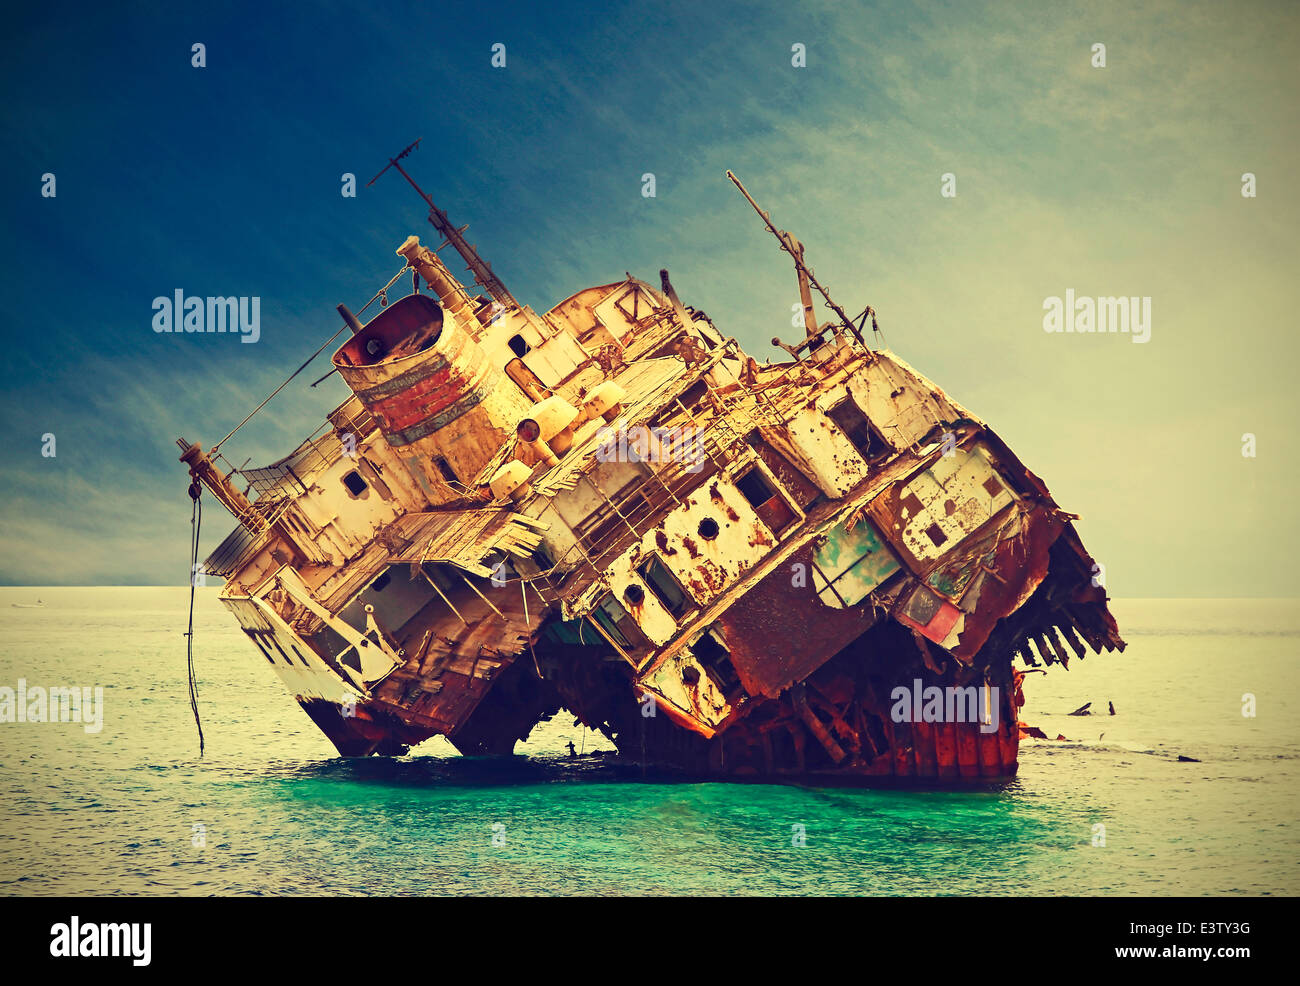 The sunken shipwreck on the reef, Egypt, vintage retro filtered. Stock Photo